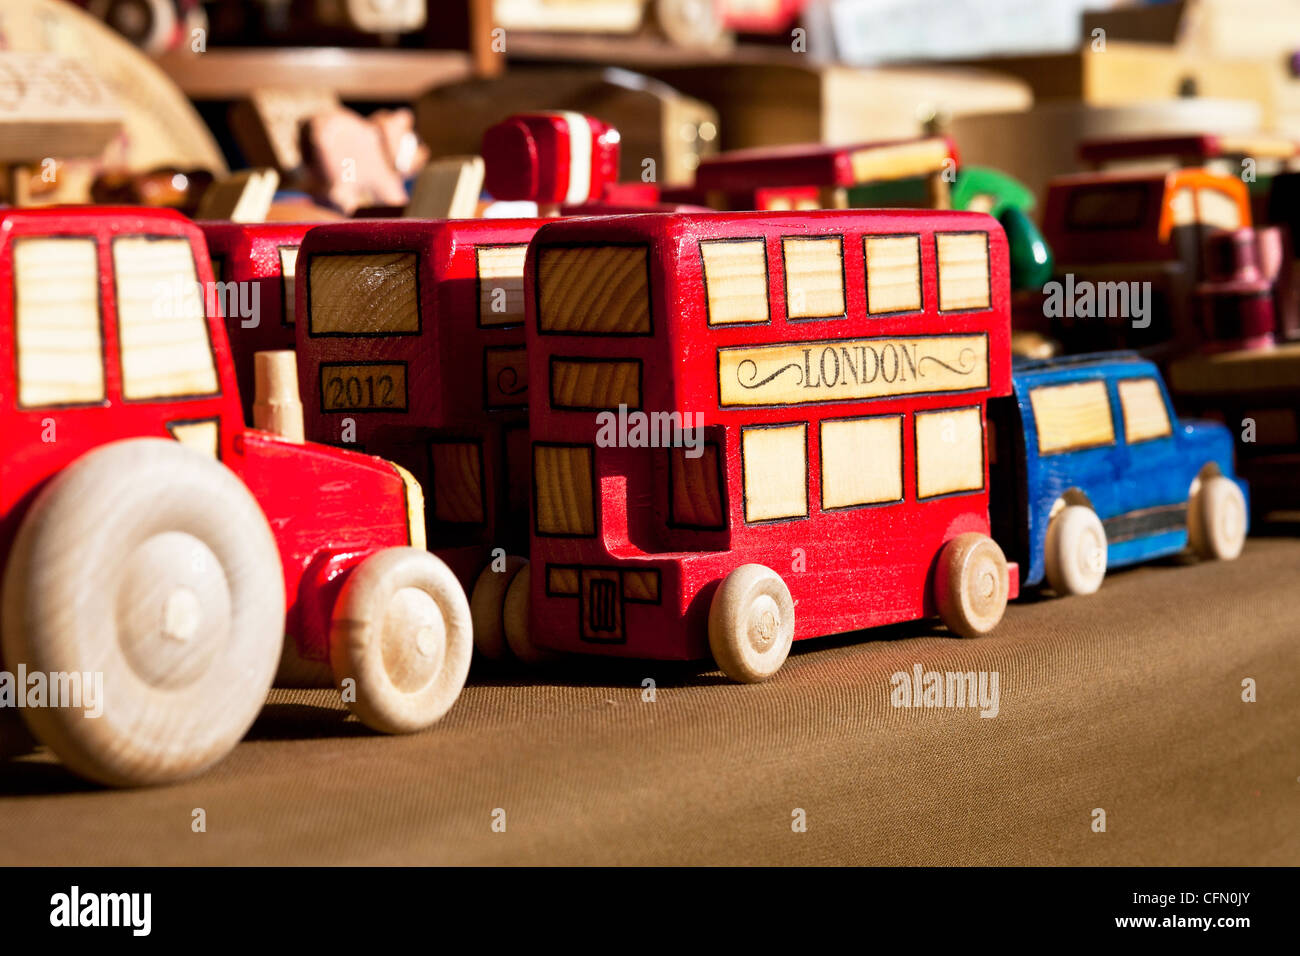 London double-decker bus carvings - traditional wooden toys on sale at living history fayre Stock Photo